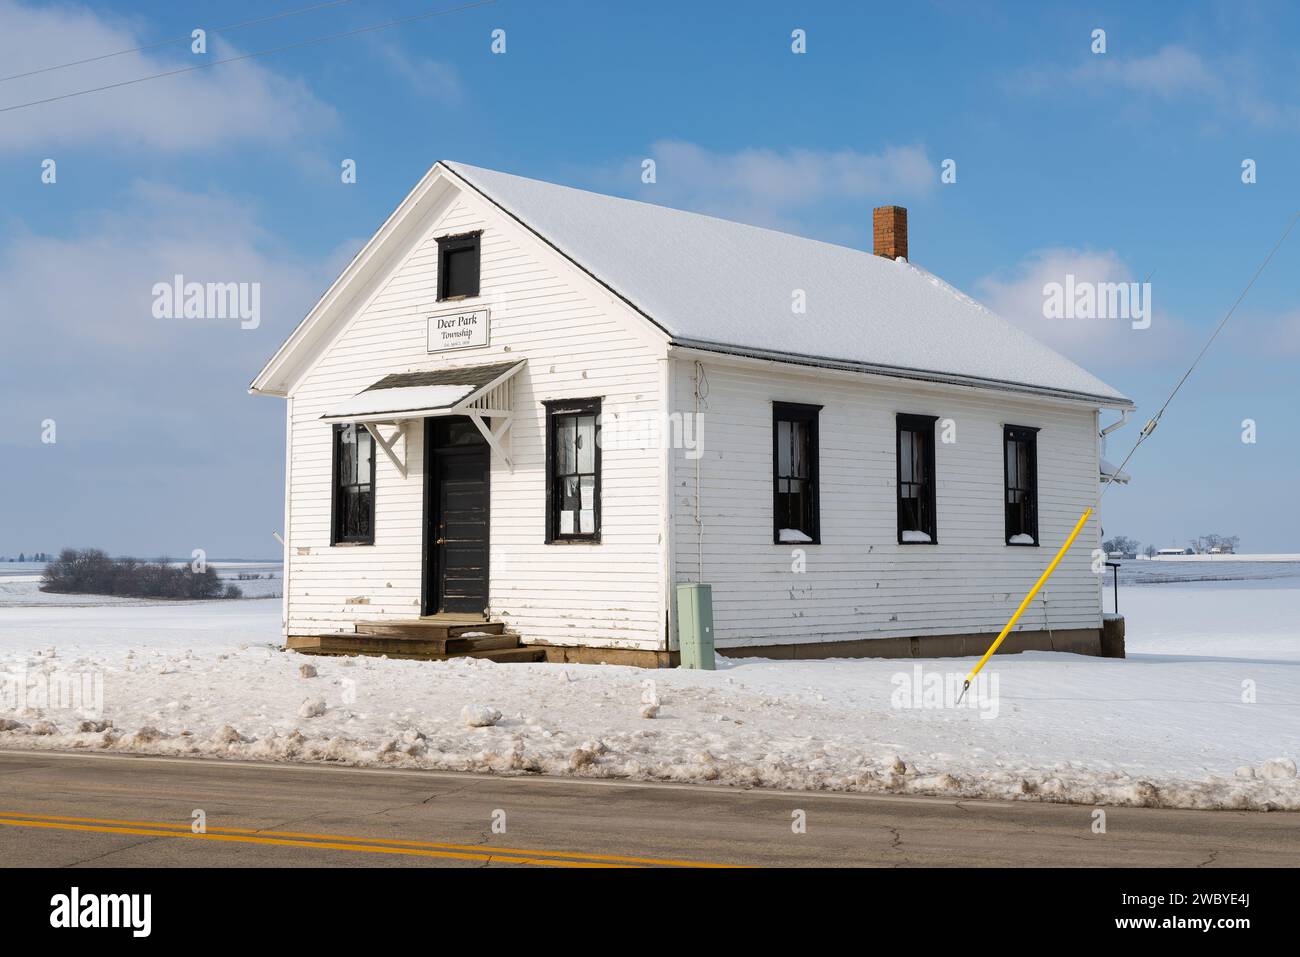 Old one-room schoolhouse in Deer Park Township, Illinois, USA. Stock Photo